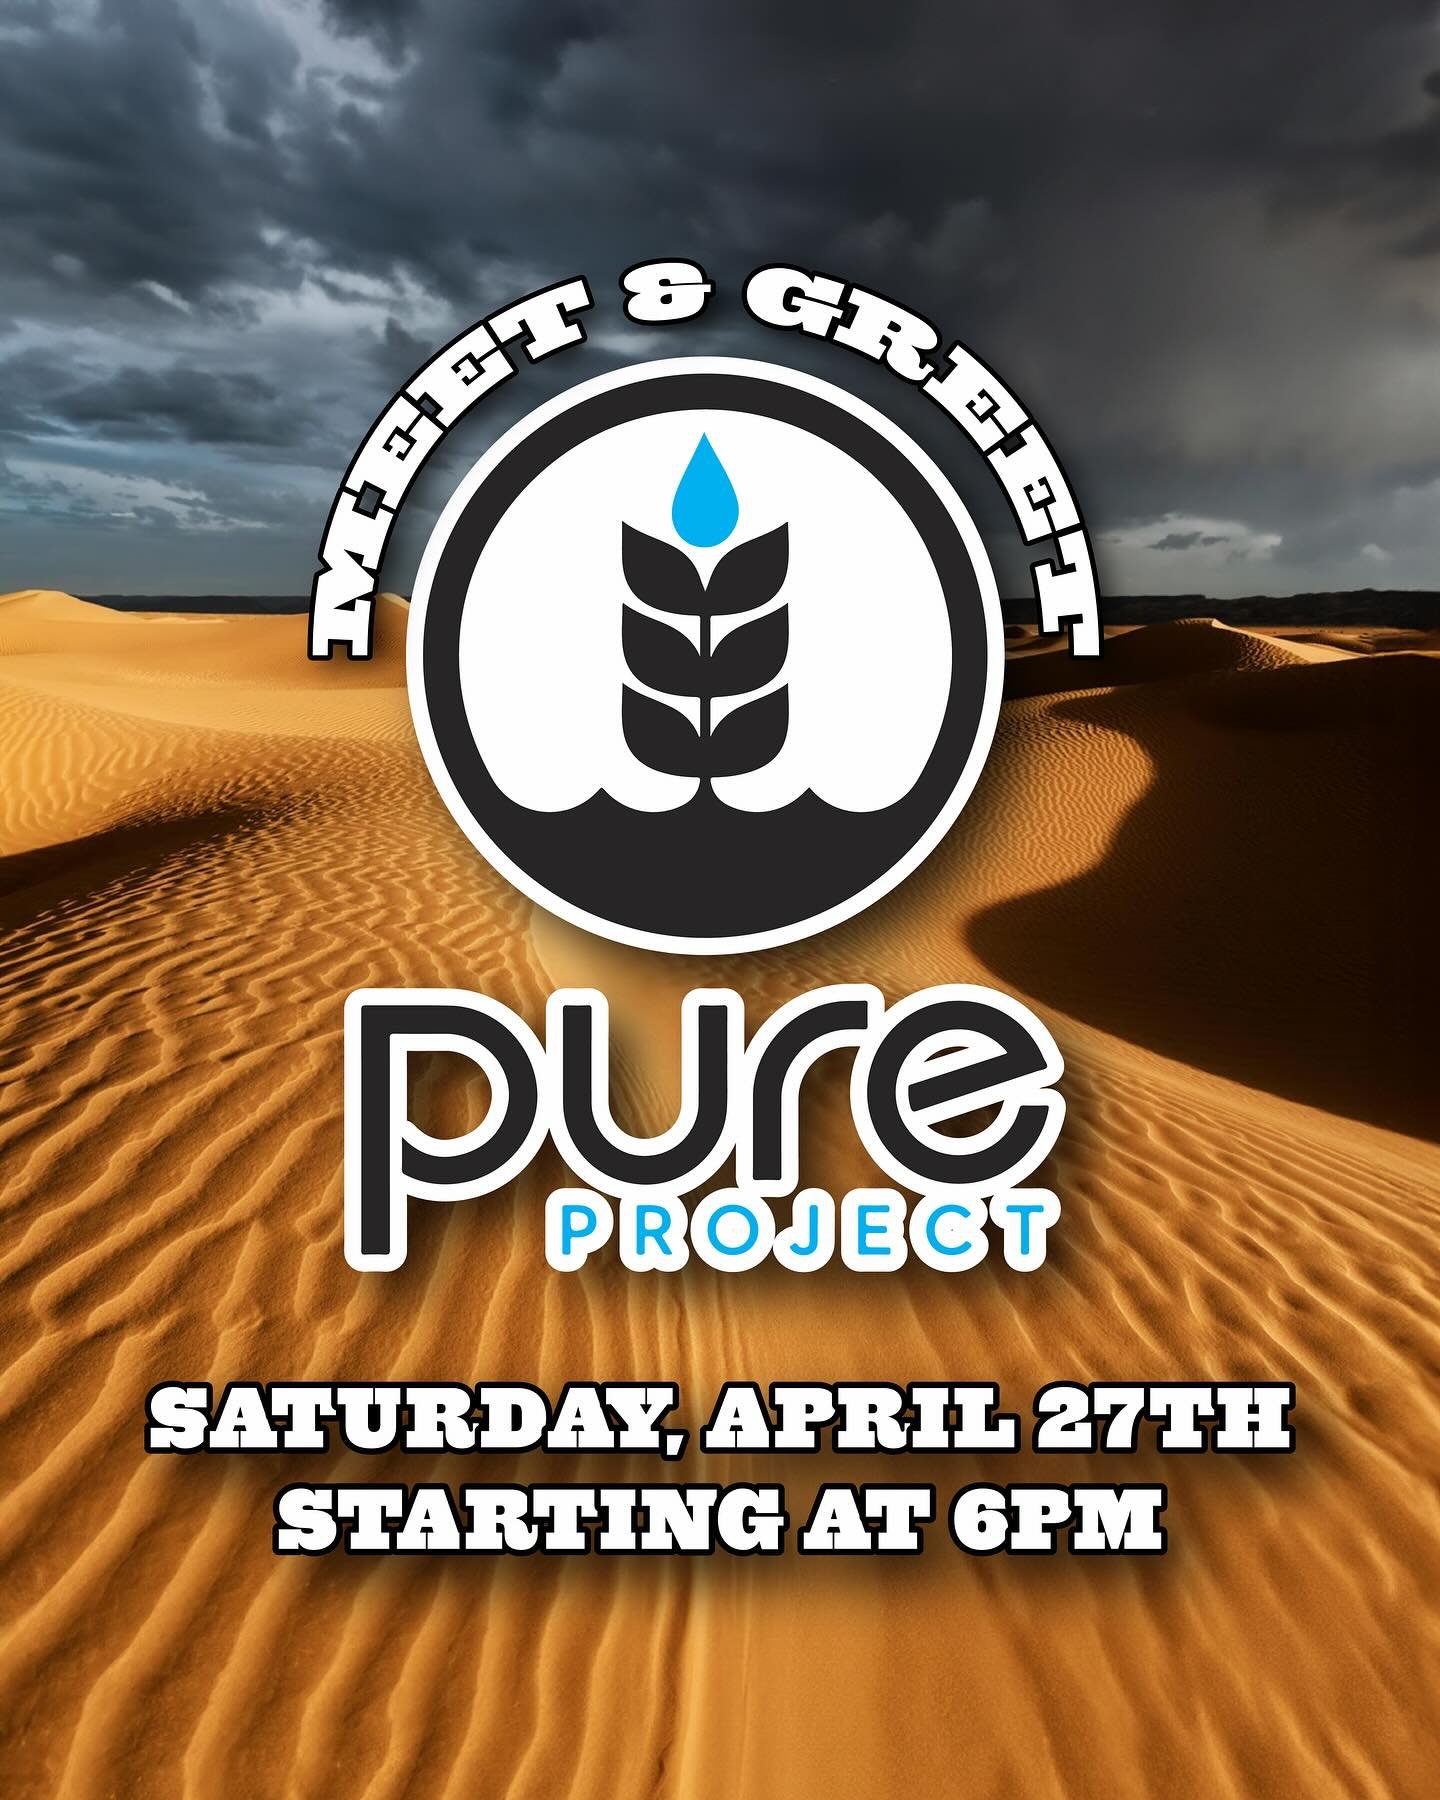 COUPLE TAP TAKEOVERS COMING AT YA! 🍻

This Saturday, is our @purebrewing Meet &amp; Greet, come thru and hang out with Jensen and talk about their amazing brews and more! See what we&rsquo;ll be tapping tomorrow👇

Milagro - Nitro Stout
Simple Subst